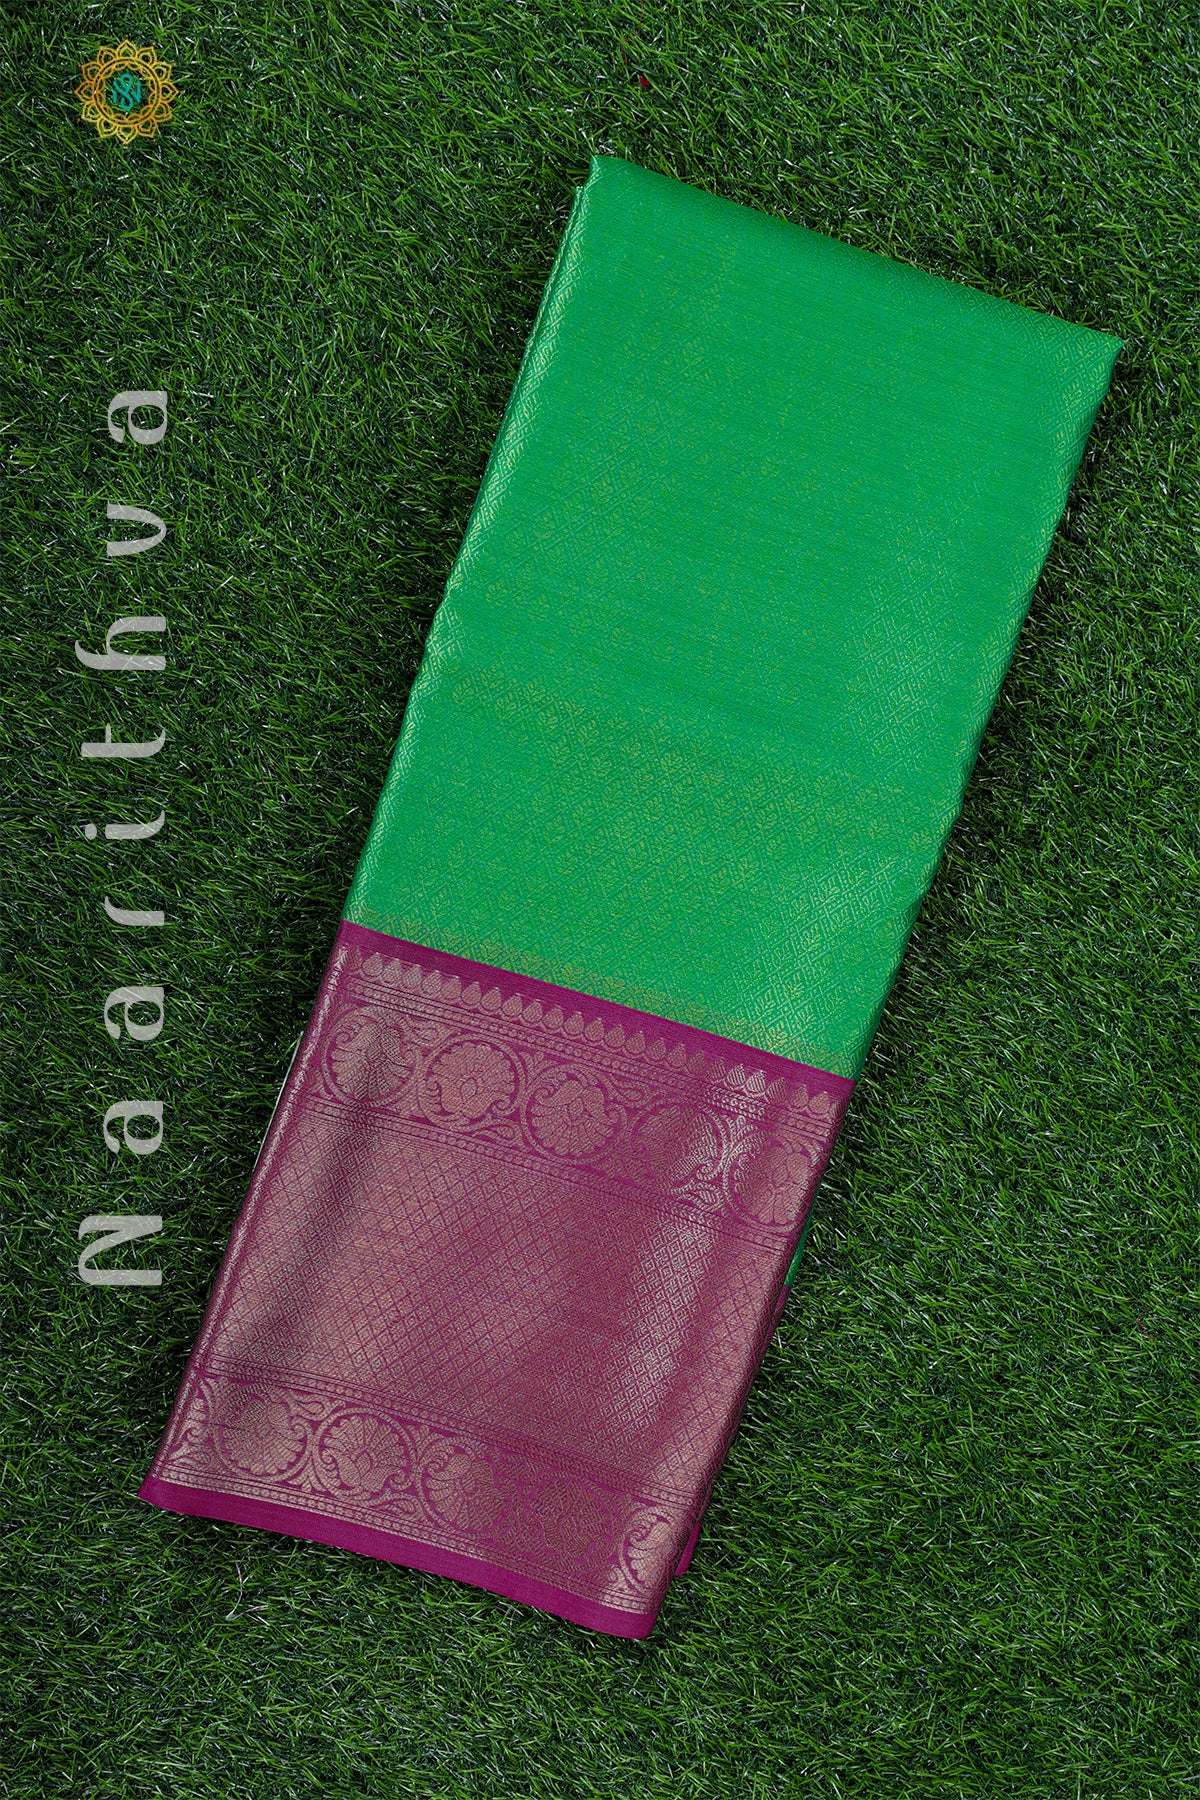 GREEN WITH PINK - KORA TANCHOI SILK WITH CONTRAST BORDER